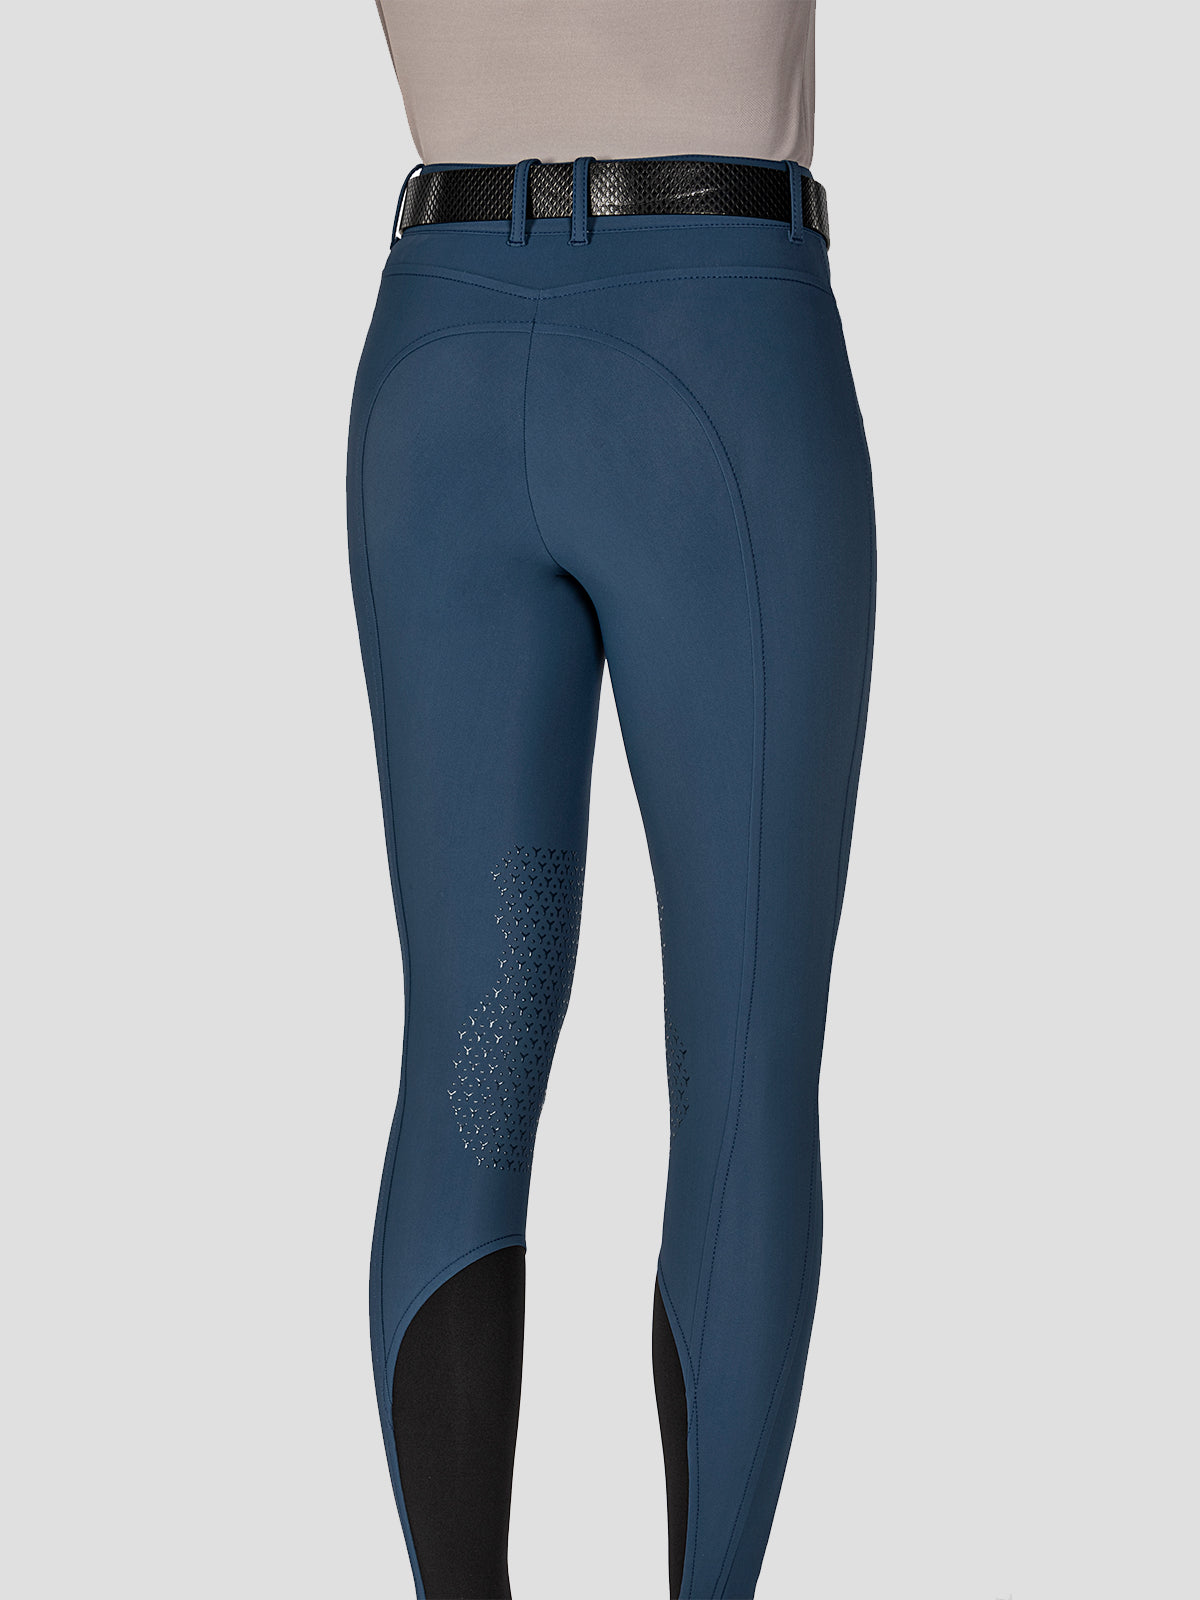 EQUILINE ERICIEKH B-MOVE LIGHT HIGH WAIST LADIES KNEE GRIP BREECHES WITH UV PROTECTION